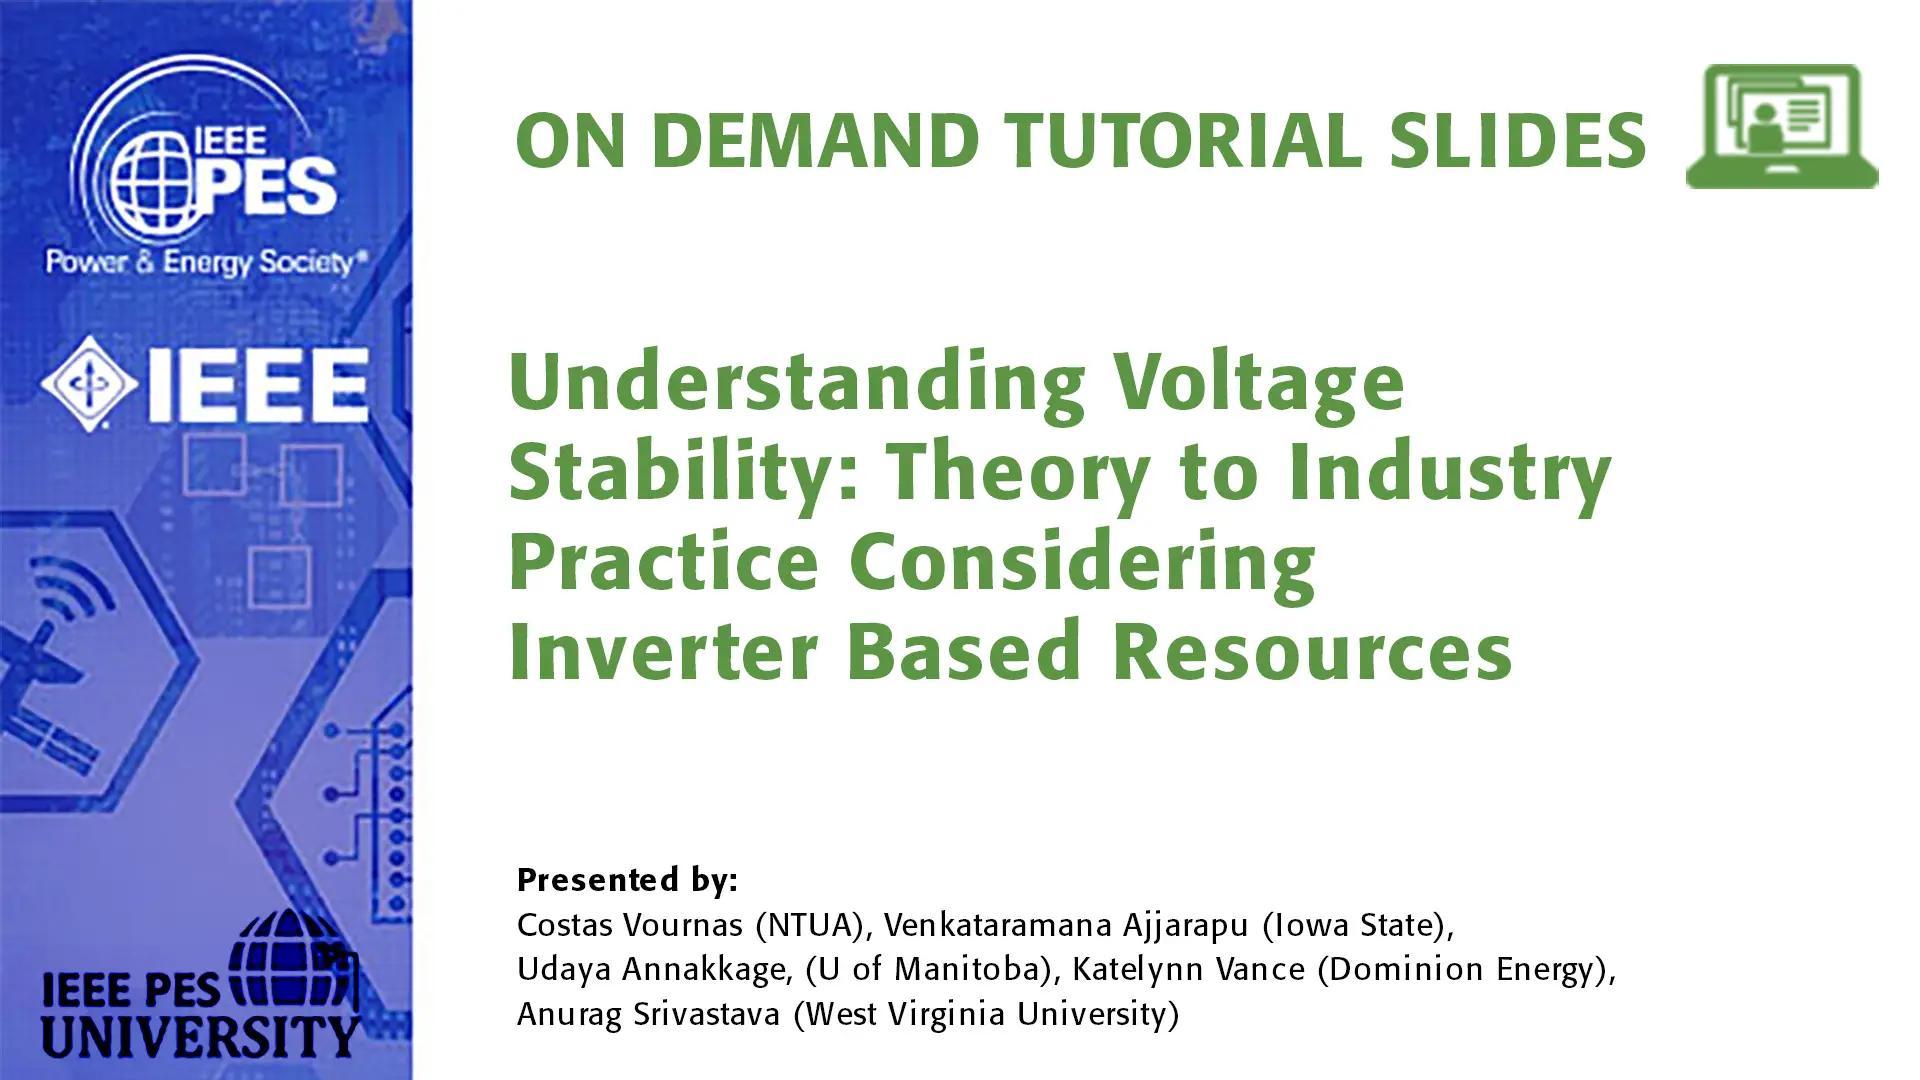 GM 24 Tutorial - Understanding Voltage Stability: Theory to Industry Practice Considering Inverter Based Resources (Slides)